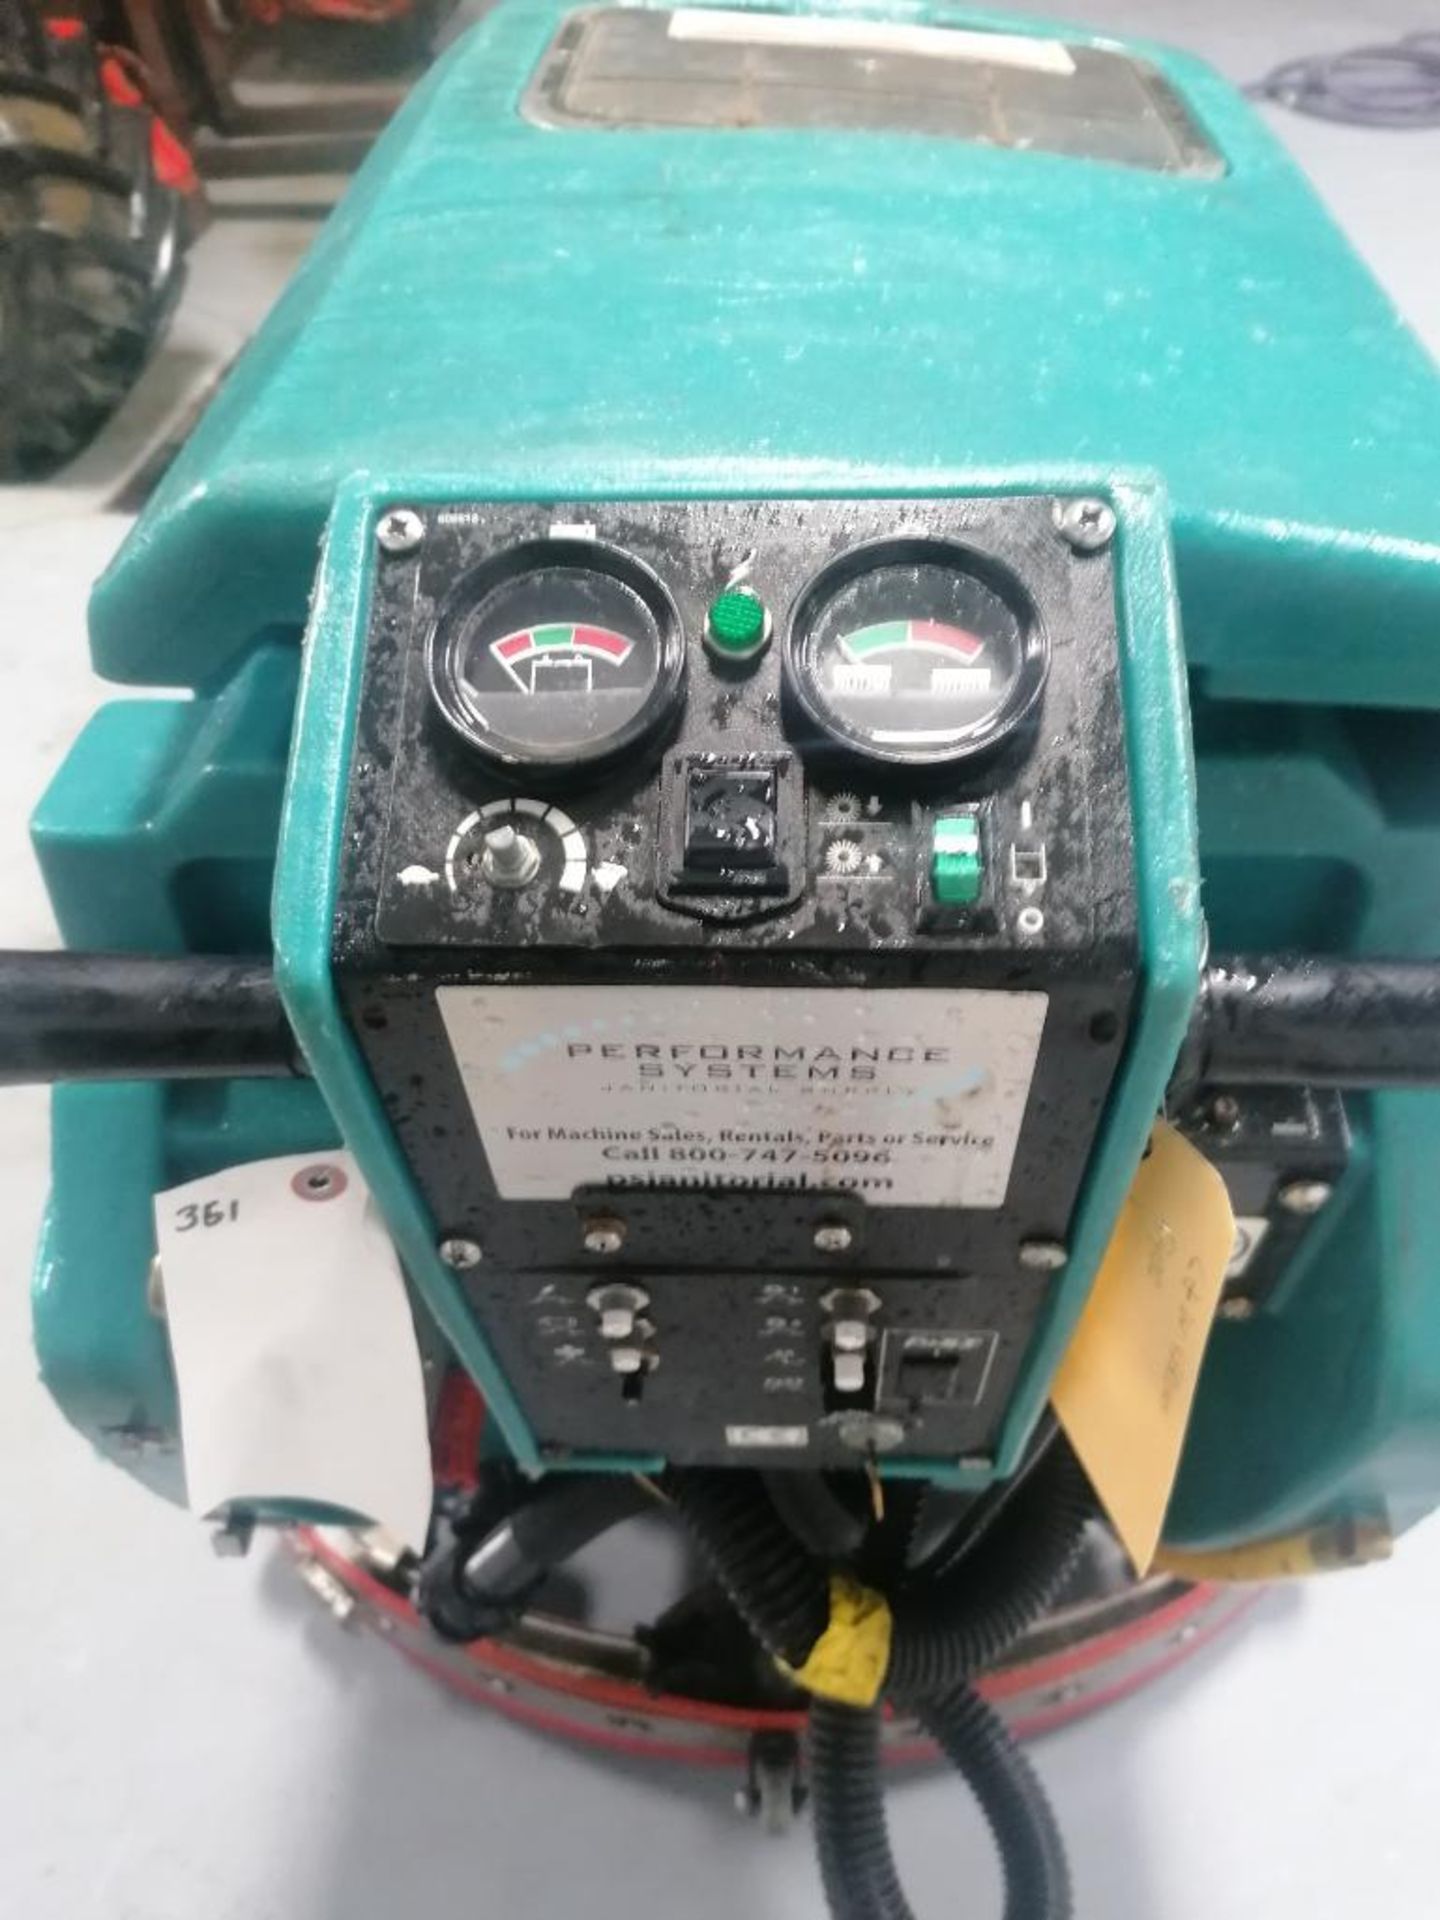 Tennant 5400 Floor Scrubber, Serial #540010229139 24 V, 21 Hours. Located in Mt. Pleasant, IA. - Image 13 of 19